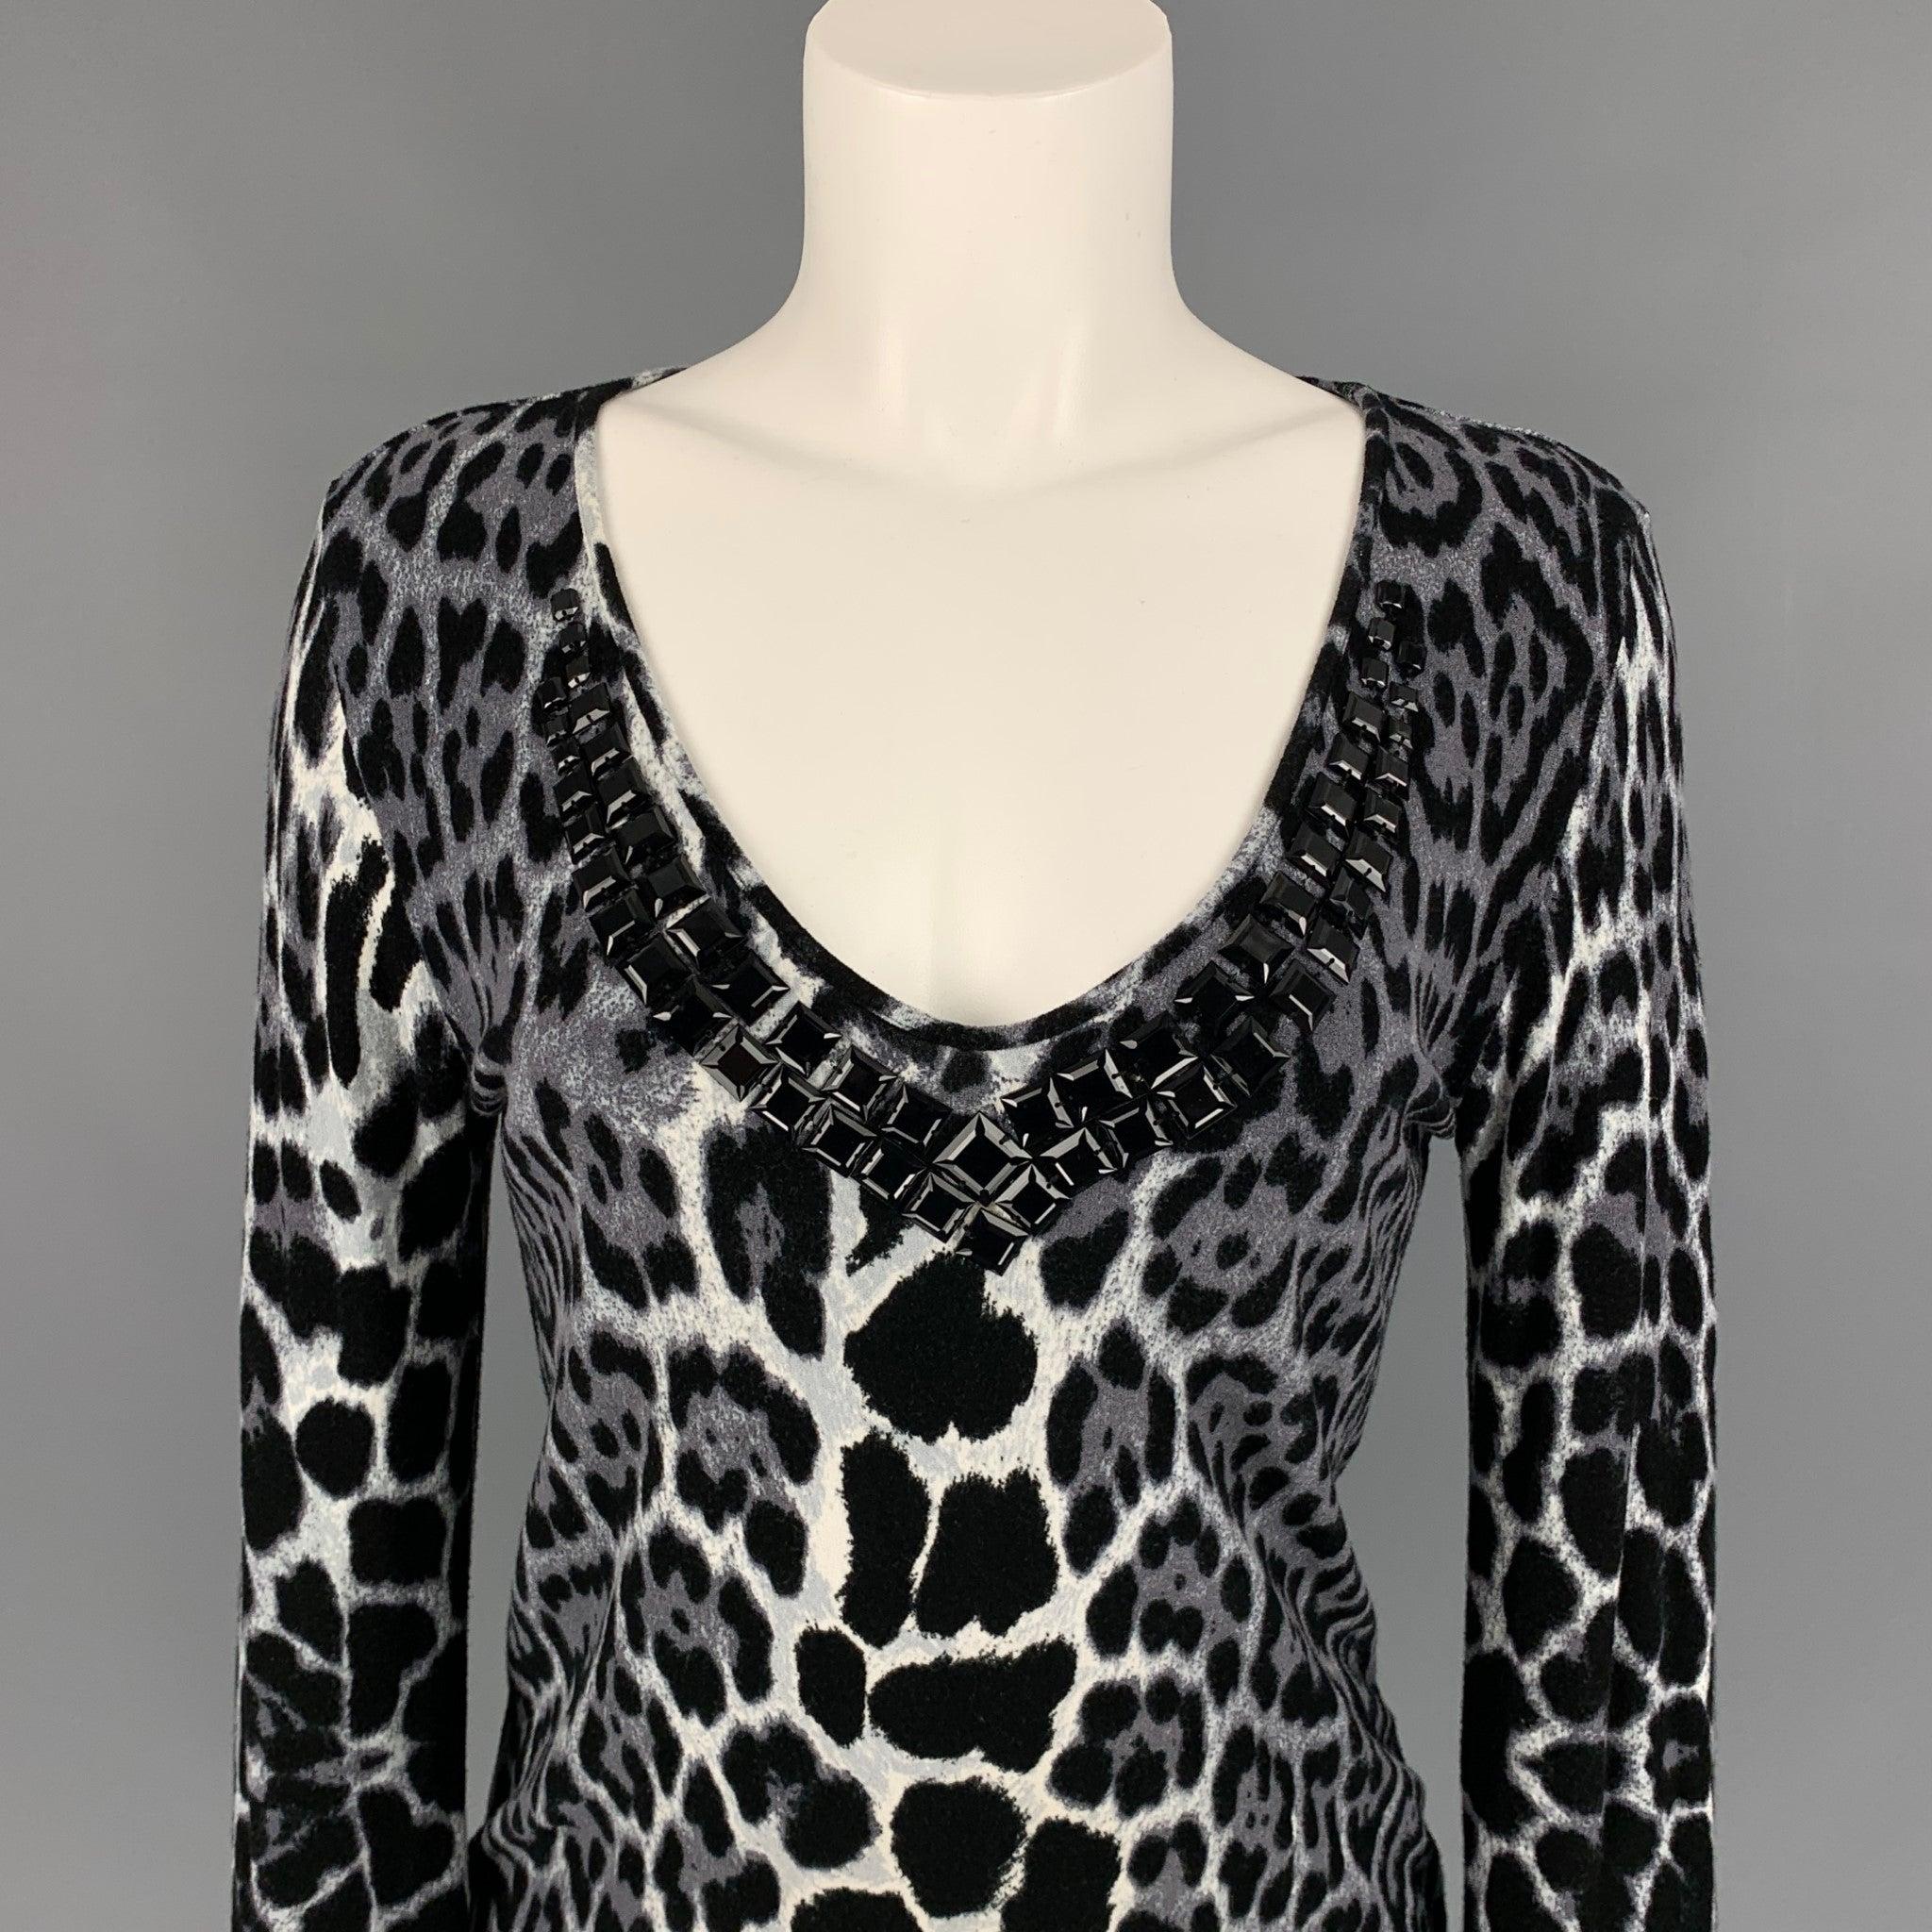 BLUMARINE pullover comes in a grey & black animal print jersey material featuring a beaded trim design and a v-neck. Made in Italy.
Very Good
Pre-Owned Condition. 

Marked:   I 44 / D 38 

Measurements: 
 
Shoulder: 16 inches  Bust: 32 inches 